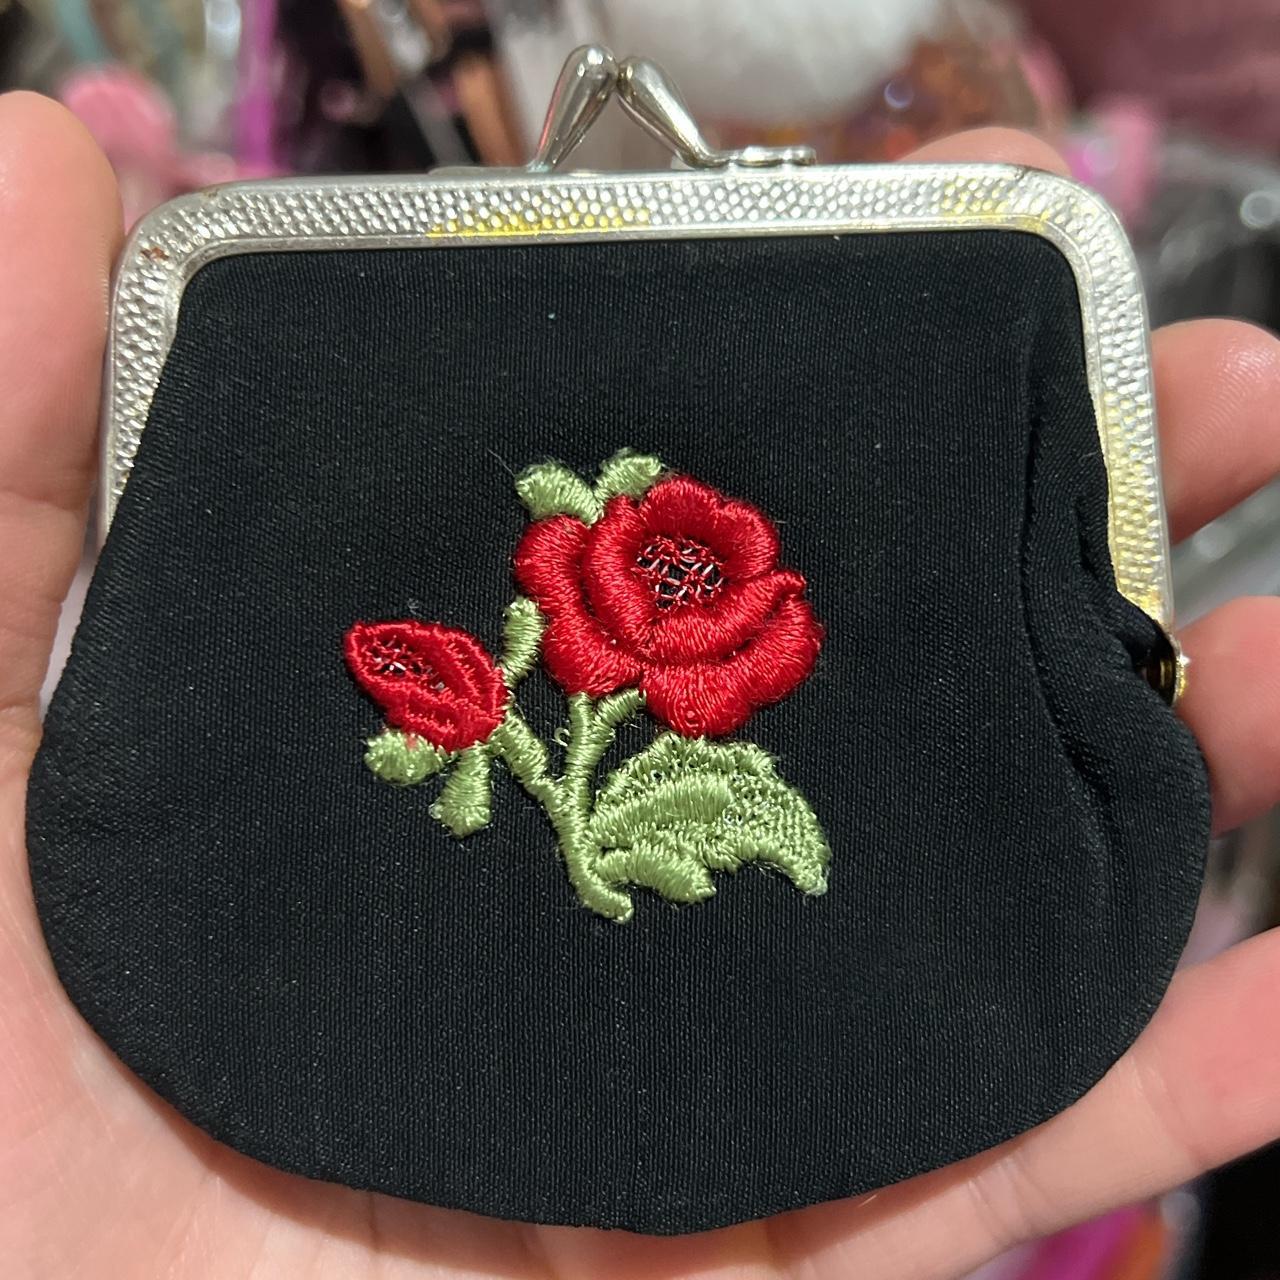 RED ROSE ] Cute Embroidered Buckle Coin Purse Wallet [ Hot Pink Polka Dots  ] : Amazon.in: Shoes & Handbags